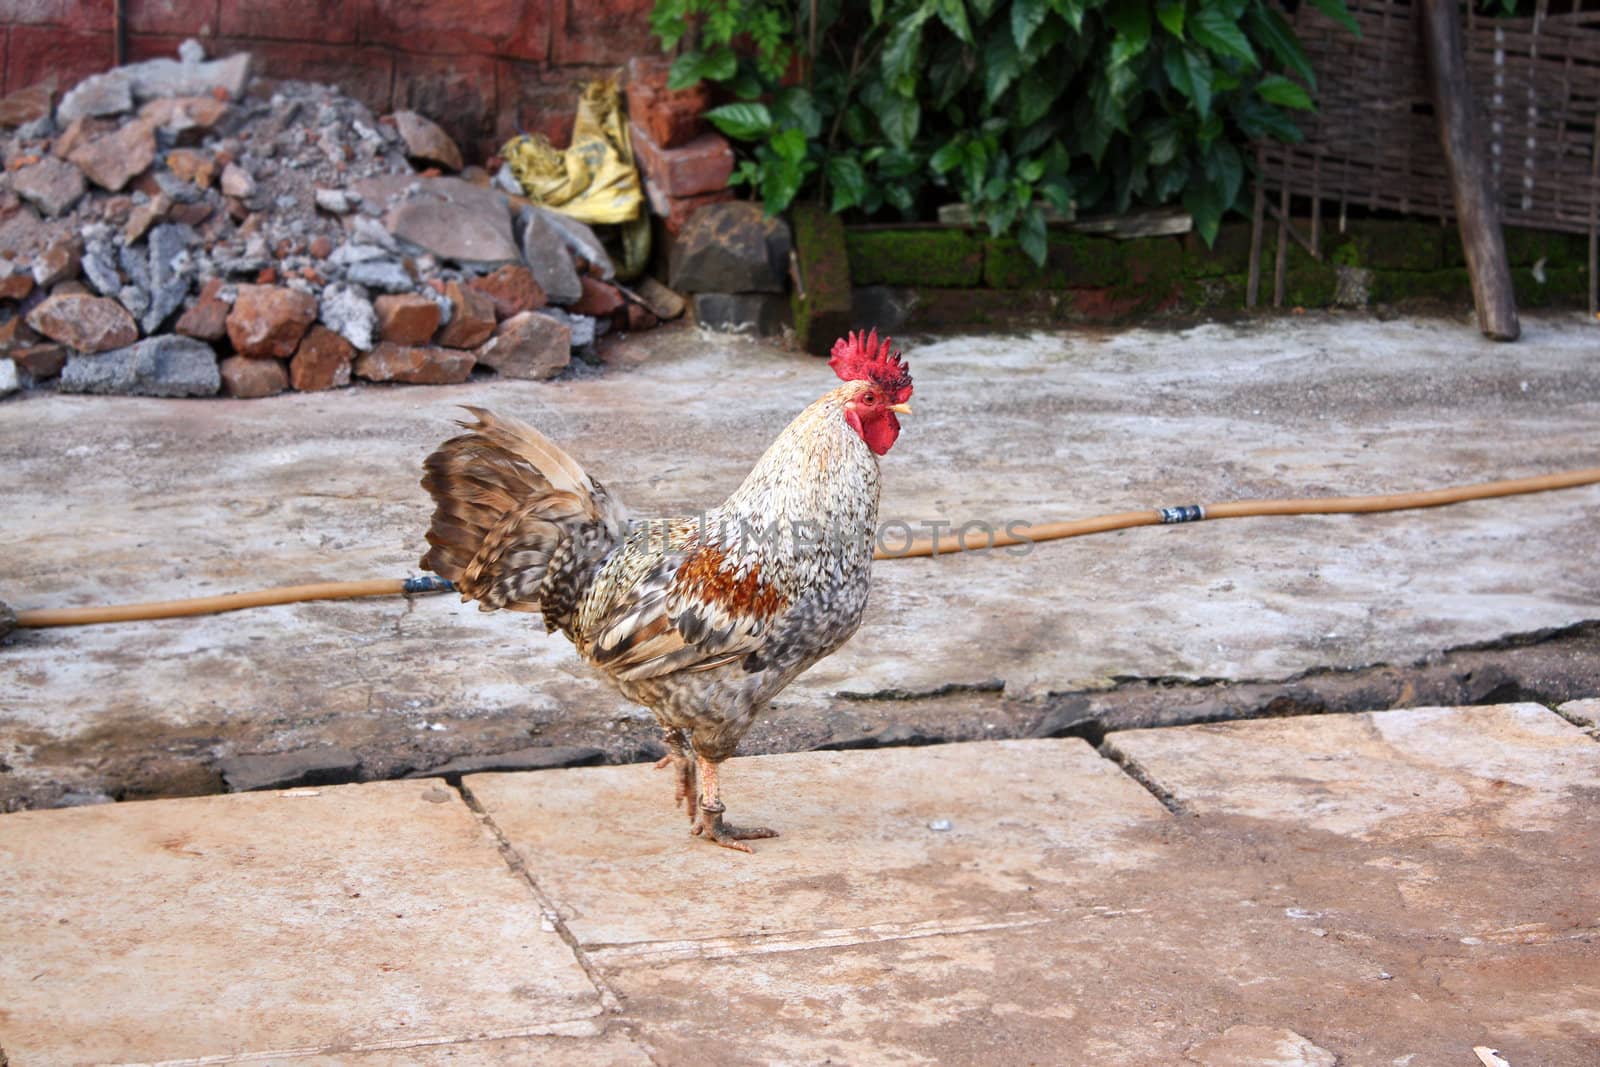 A pet rooster in the backyard of an Indian house.